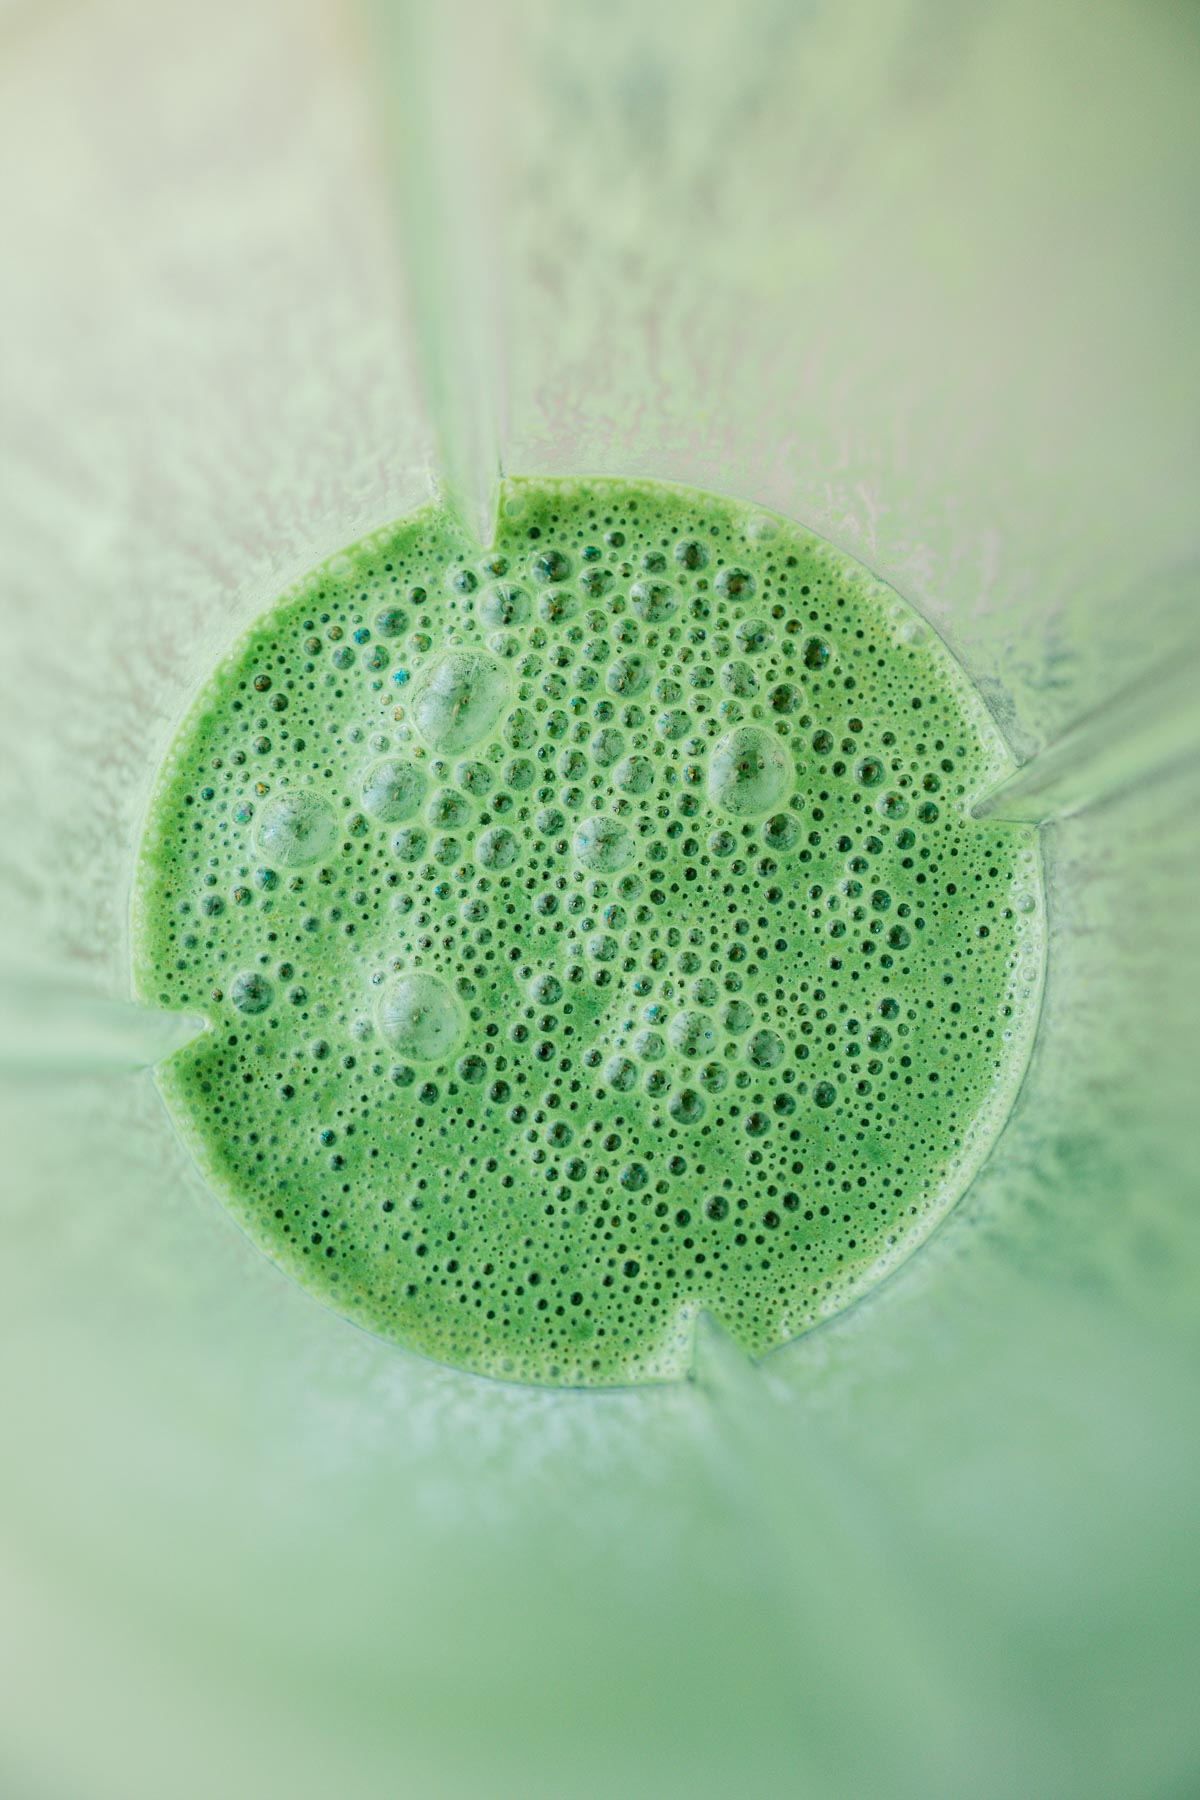 A blender filled with a green liquid.